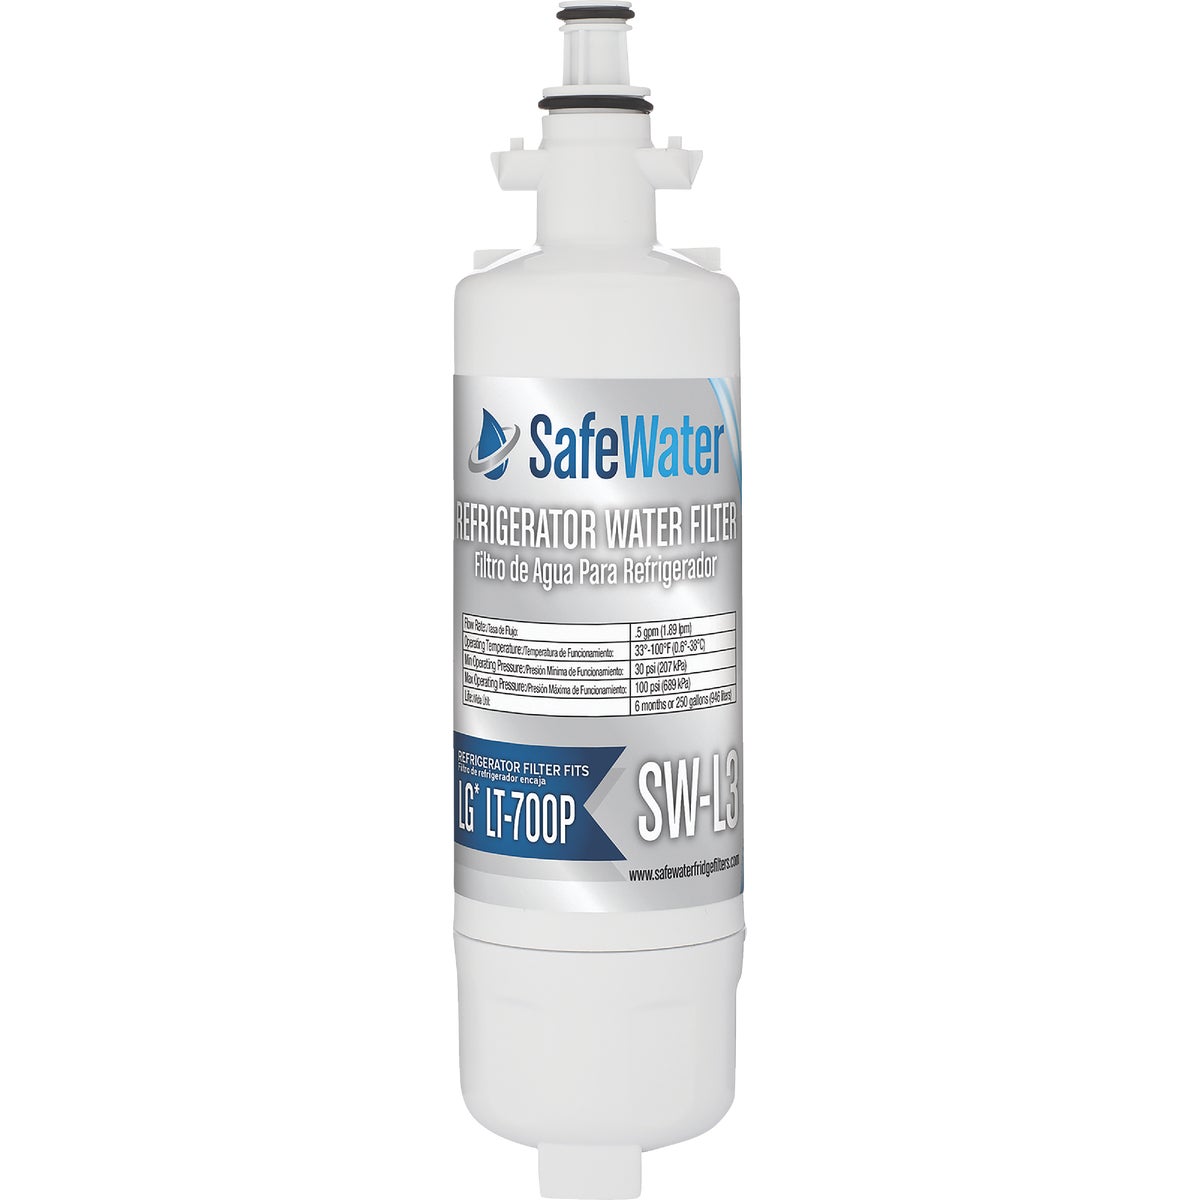 Item 400039, This EarthSmart replacement refrigerator water filter fits in place of LG 